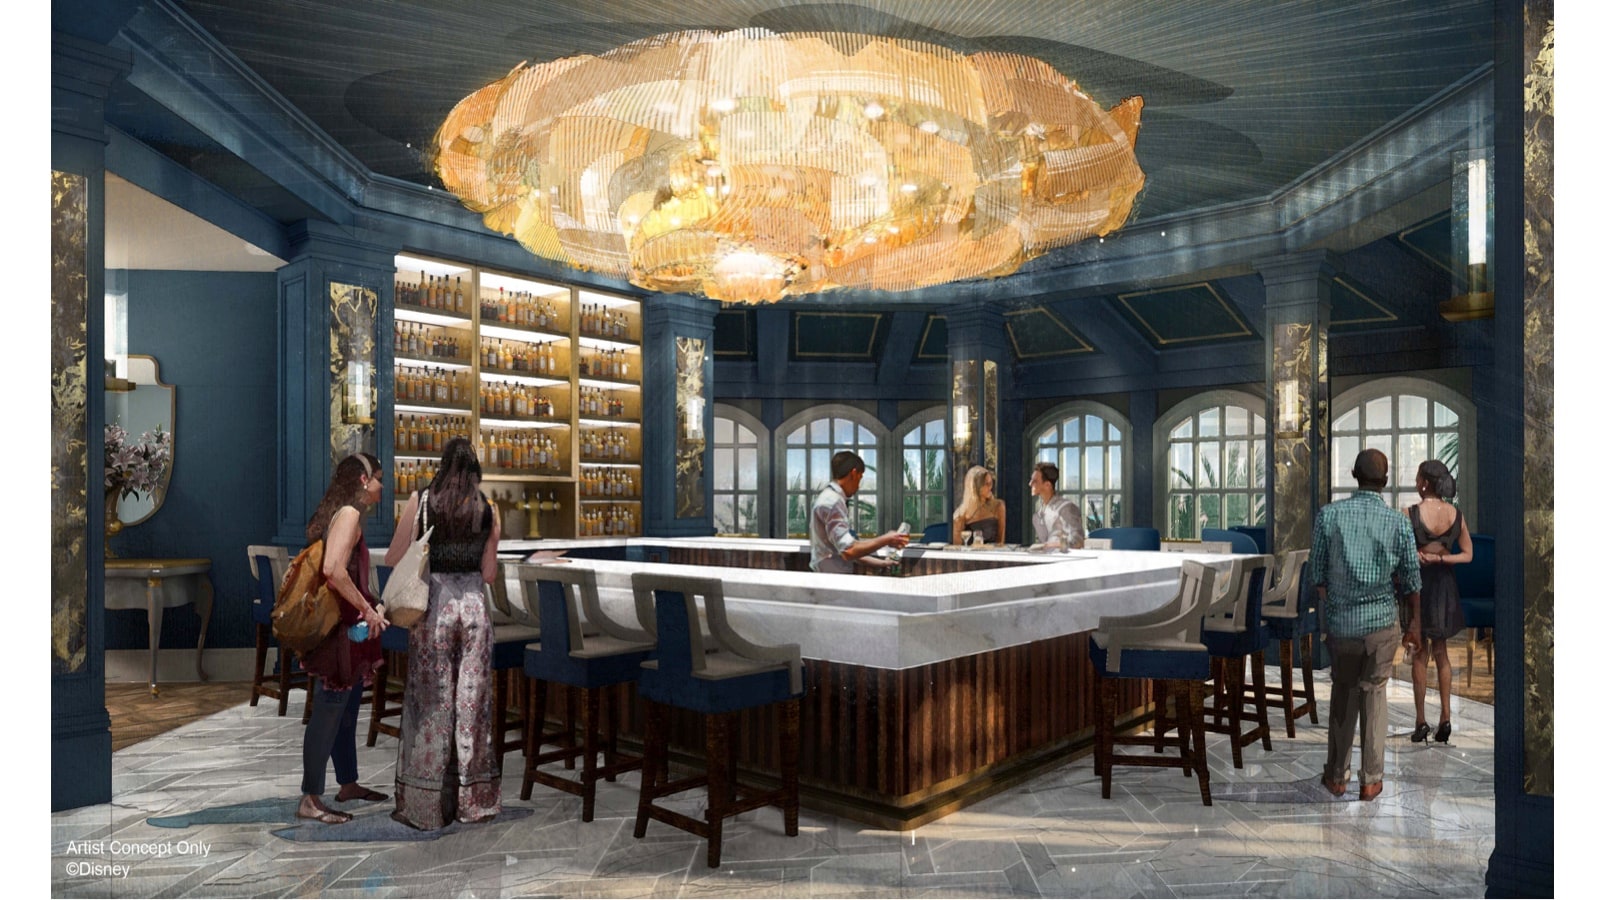 New Bar And Lounge Will Evoke Beauty And The Beast At Disney S Grand Floridian Resort Spa Disney Parks Blog